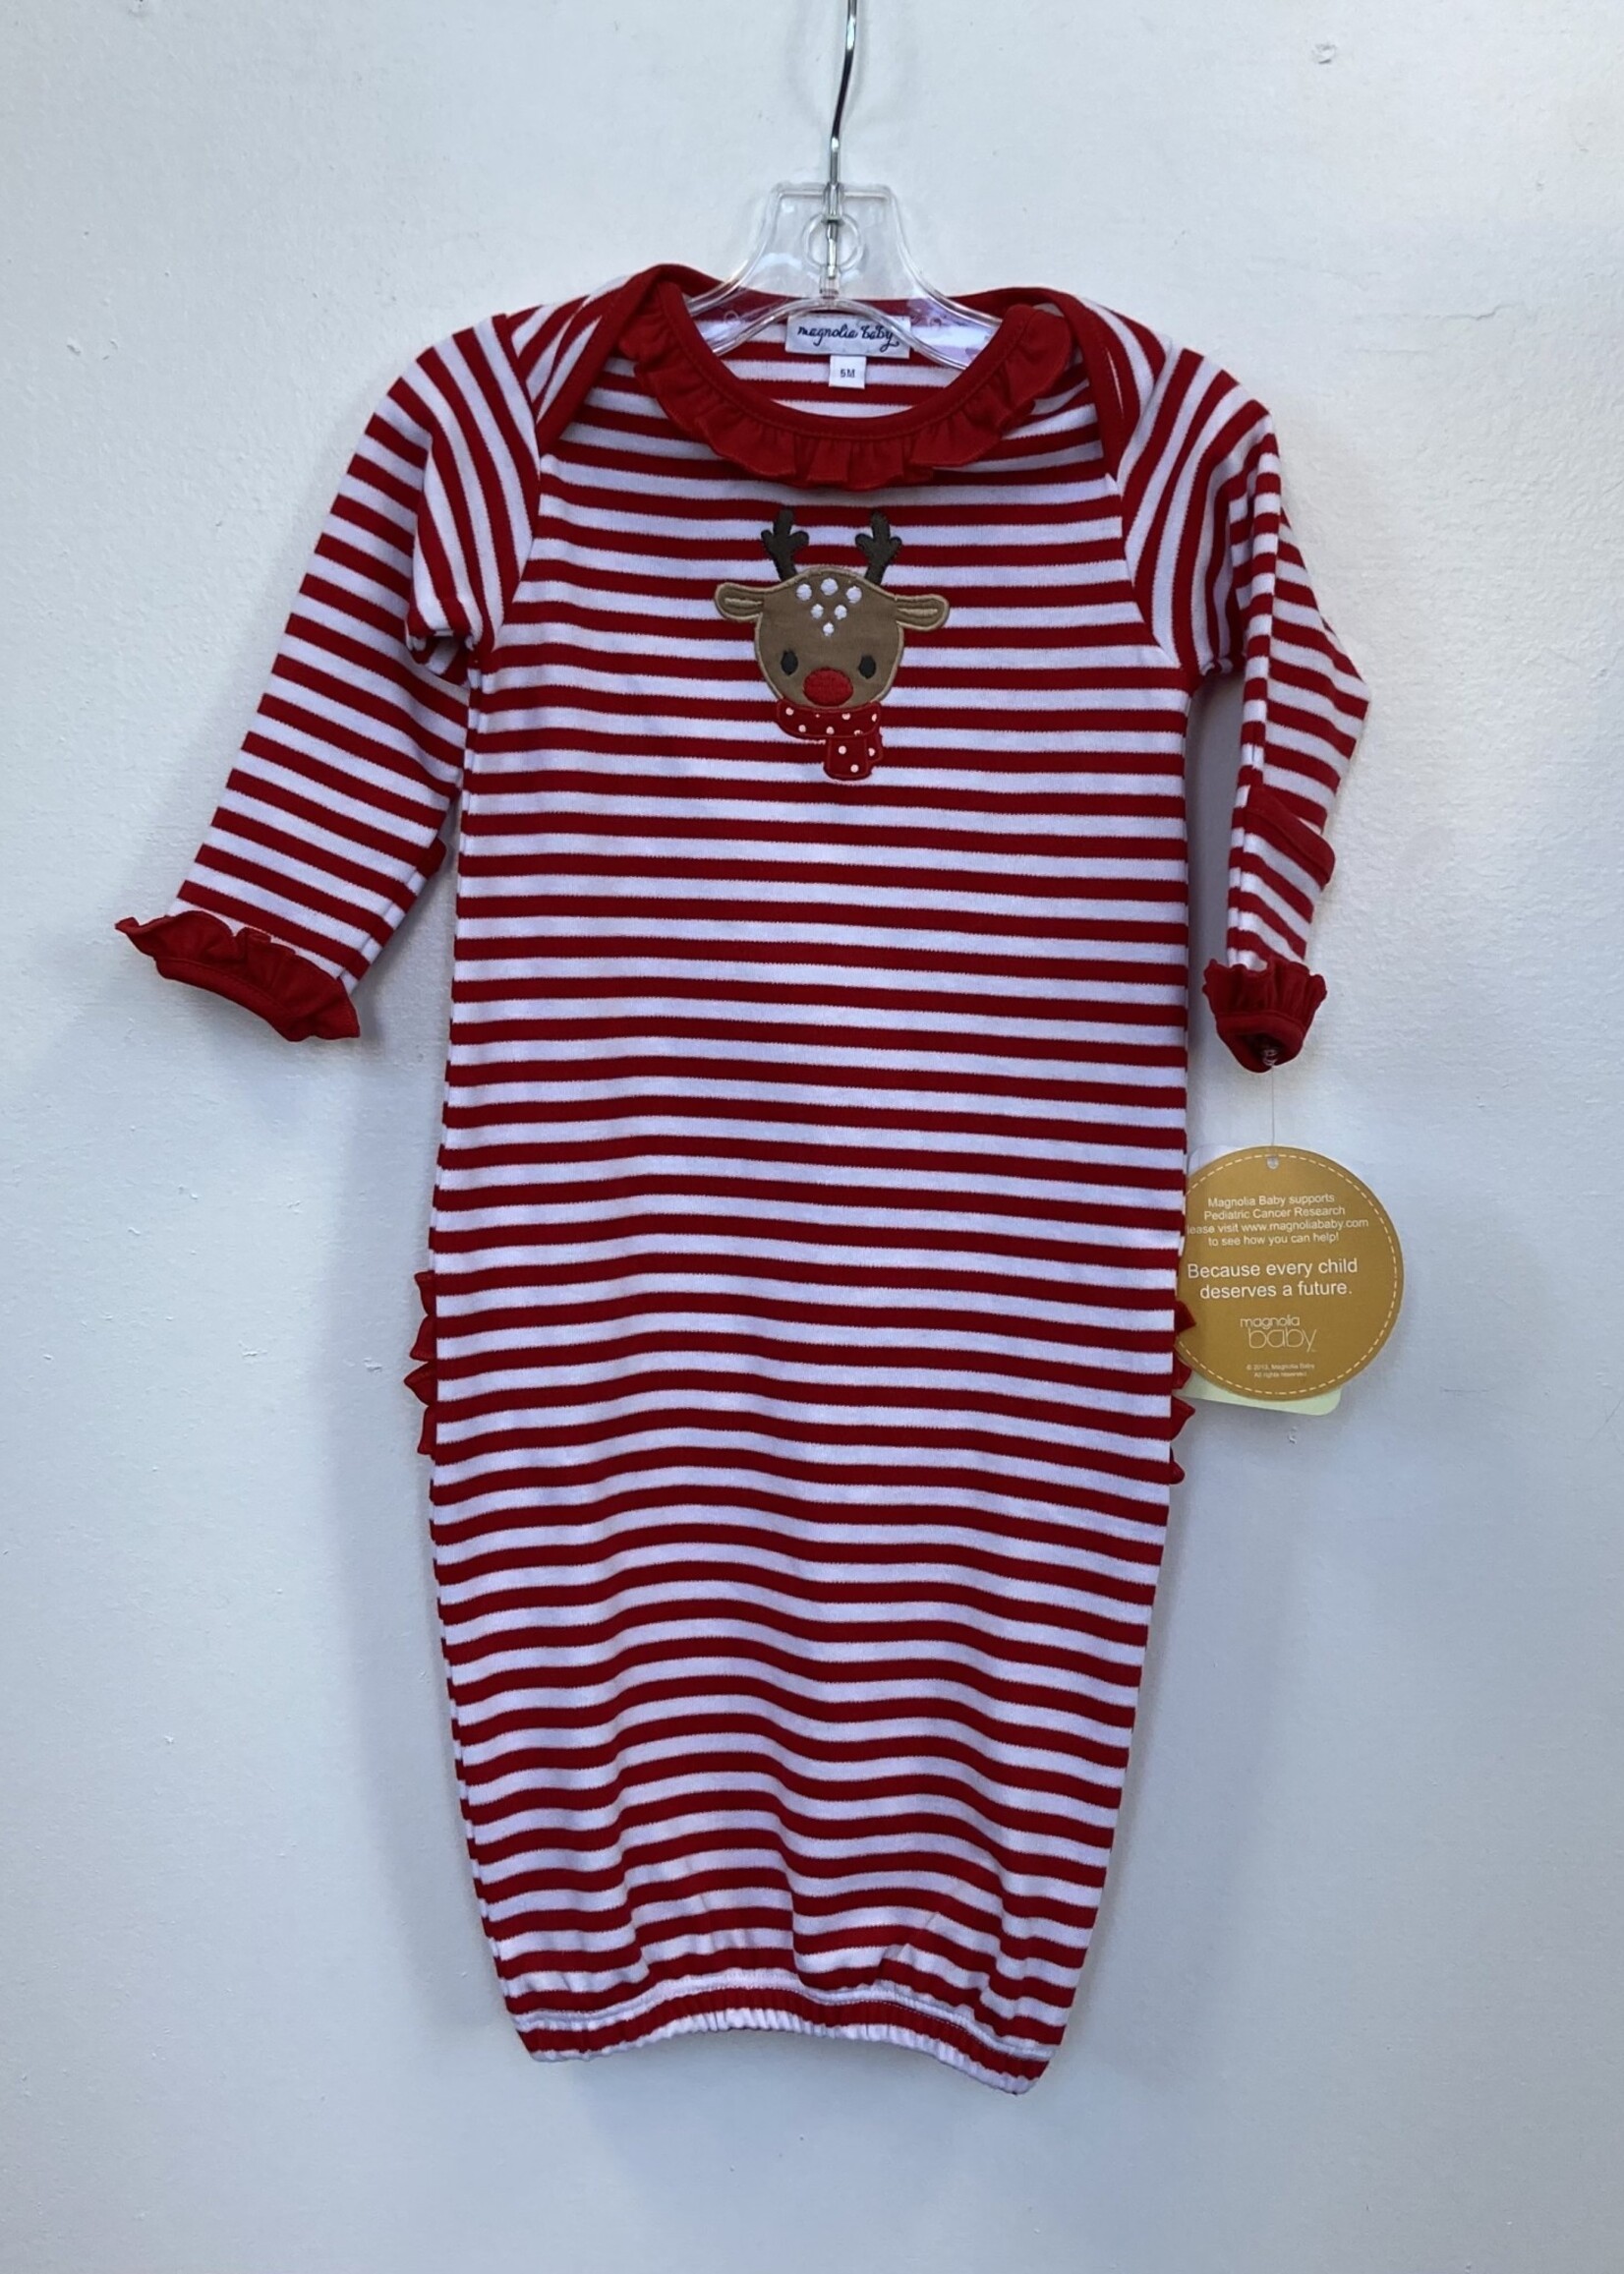 Magnolia Baby Red/White Striped Ruffle Gown w/Reindeer